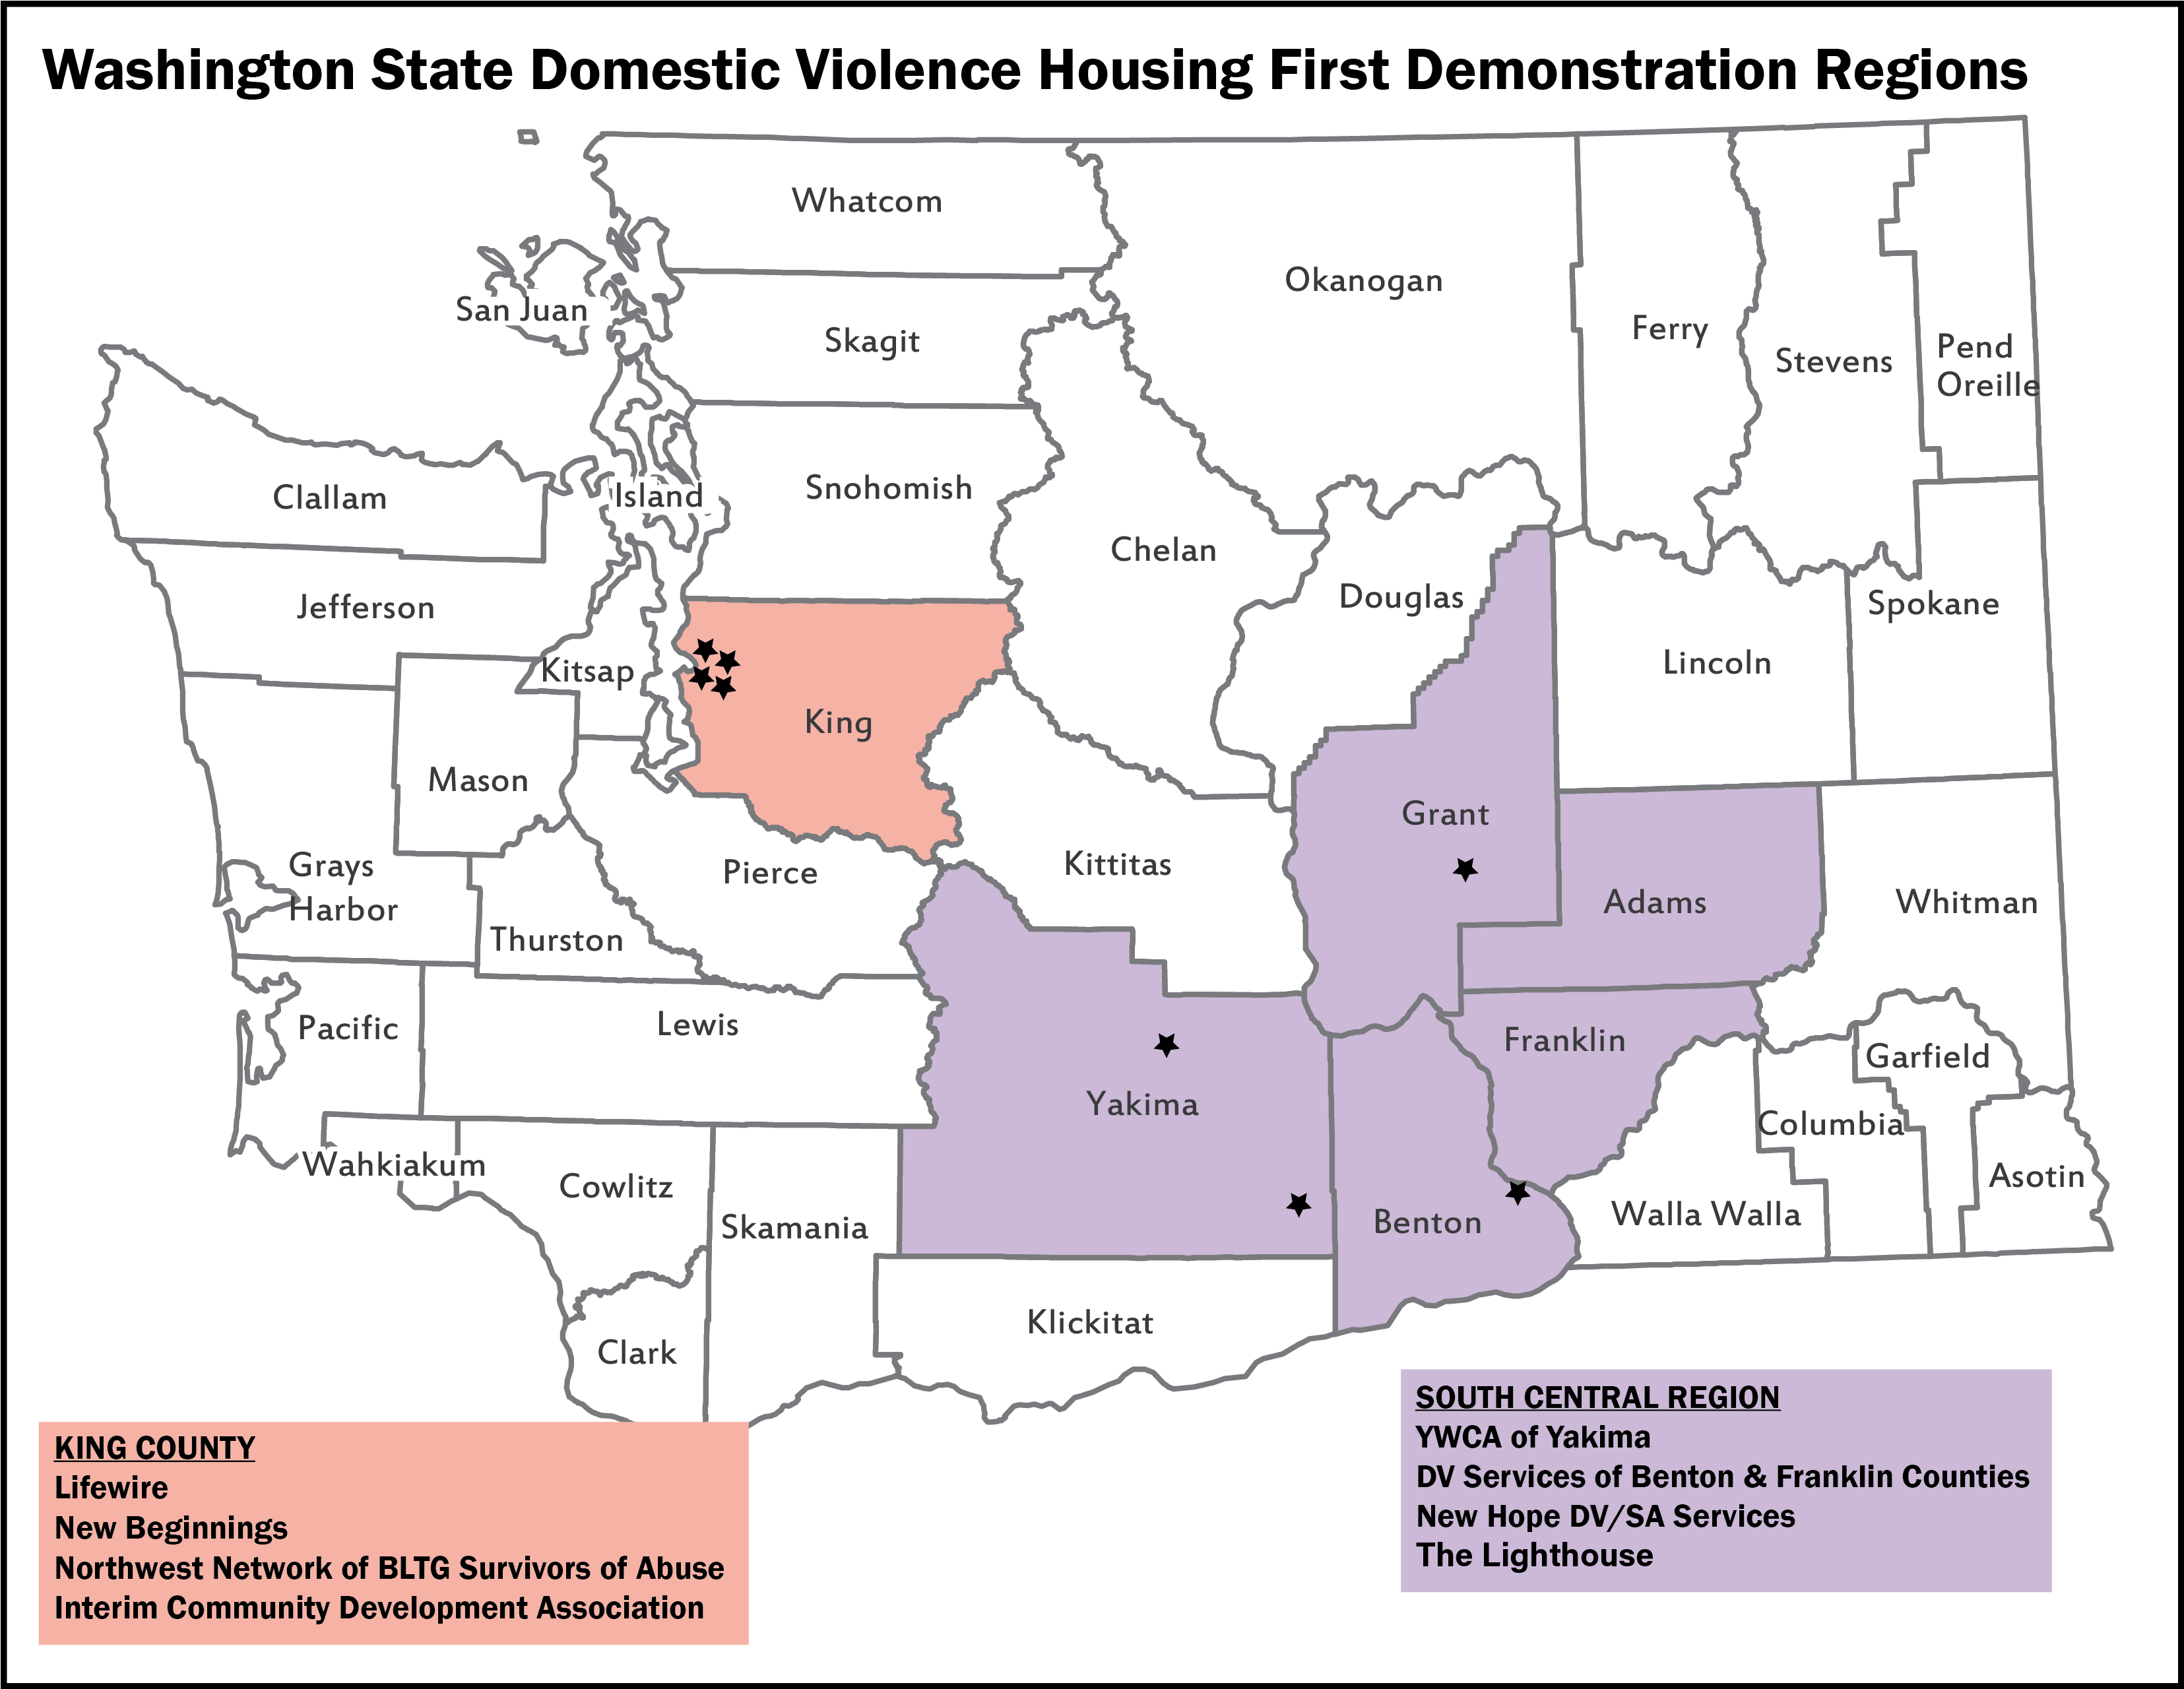 Washington State Domestic Violence Housing First Demonstration Region Map of Washington state counties with stars in King, Grant, Benton, and Yakima counties to mark the following programs: Lifewire, New Beginnings, Northwest Network of BLTG Survivors of Abuse, Interim Community Development Association in the King County Region and YWCA of Yakima, DV Services of Benton & Franklin Counties, New Hope DV/SA Services, and The Lighthouse in the South Central Region.